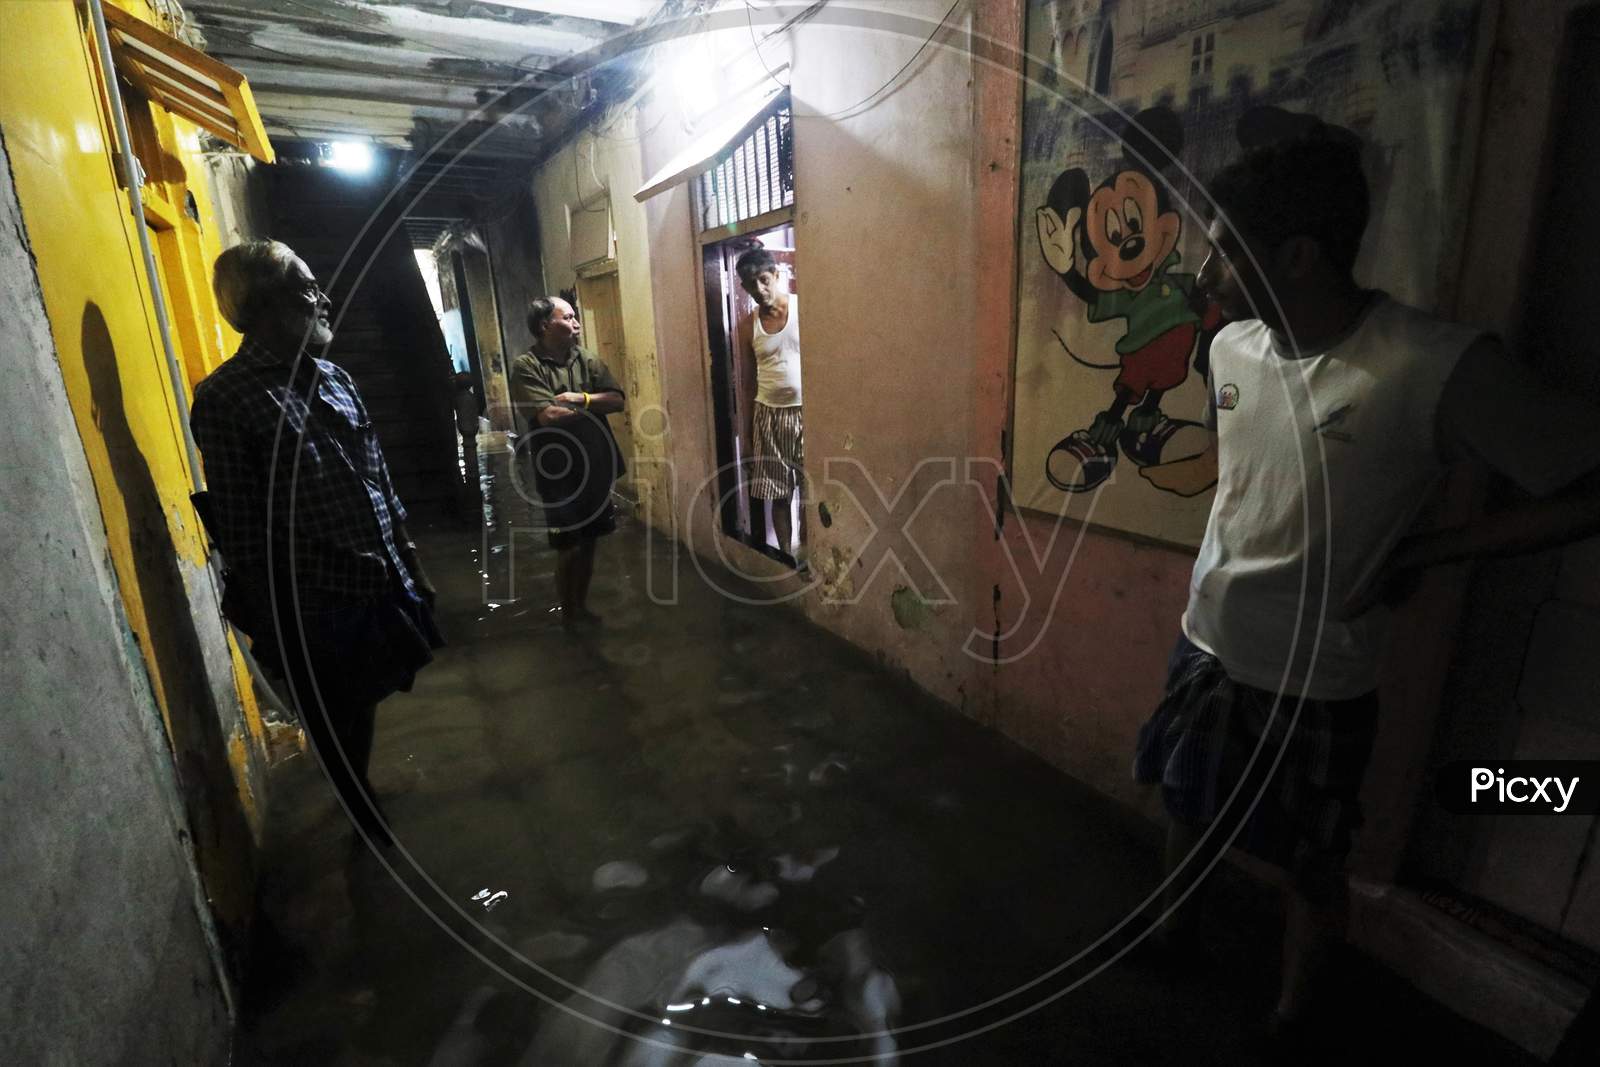 People stand outside their houses that are waterlogged due heavy rains, in Mumbai, India on September 23, 2020.